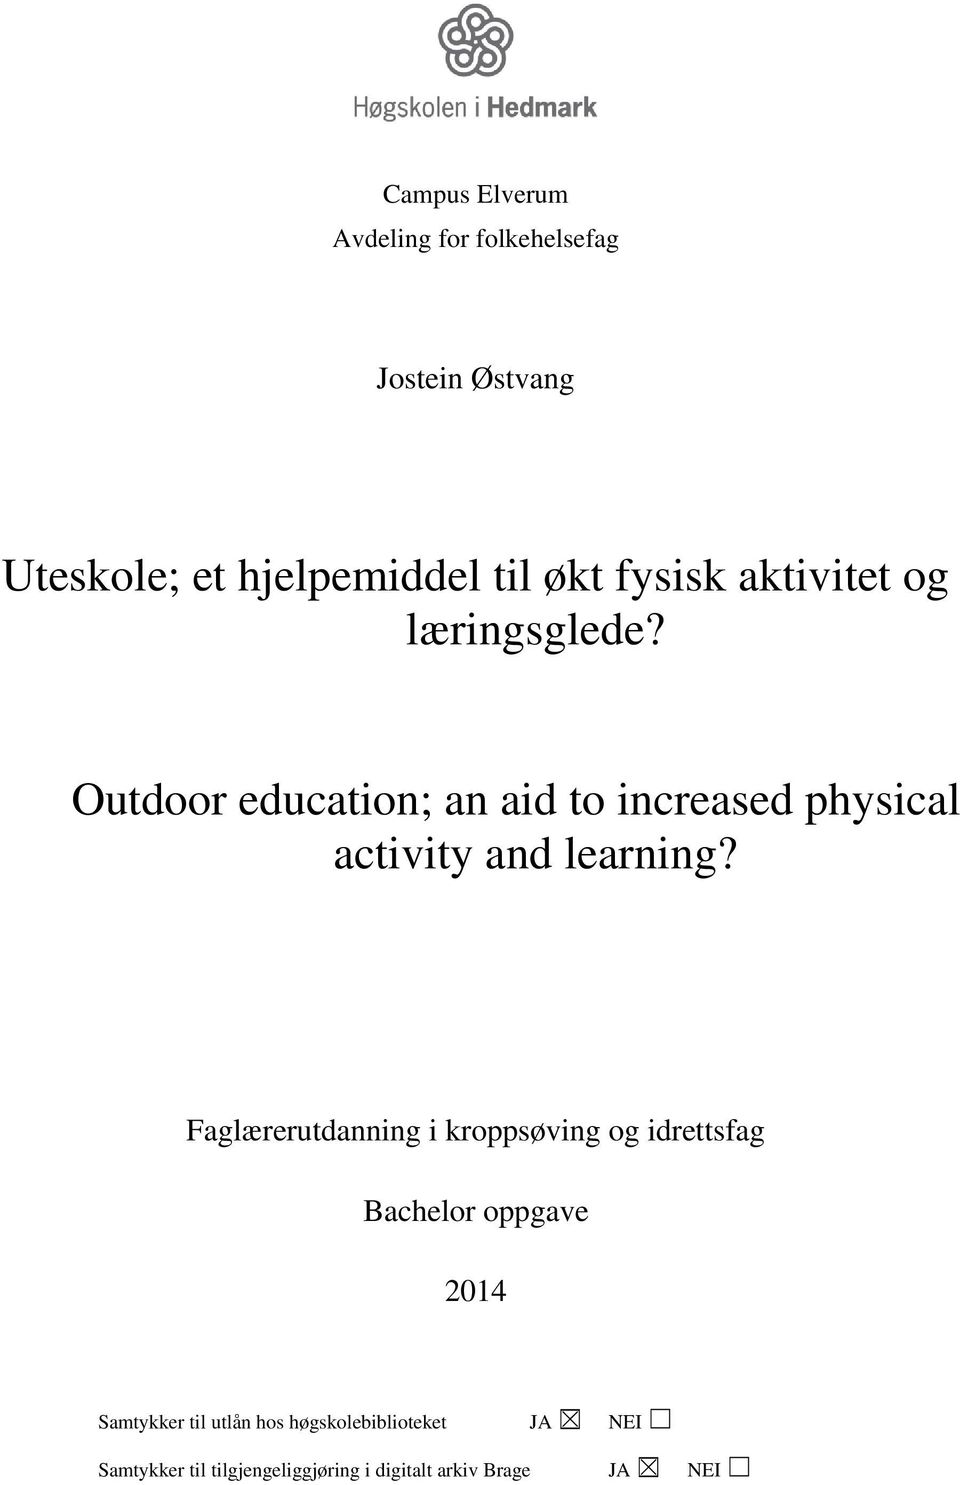 Outdoor education; an aid to increased physical activity and learning?